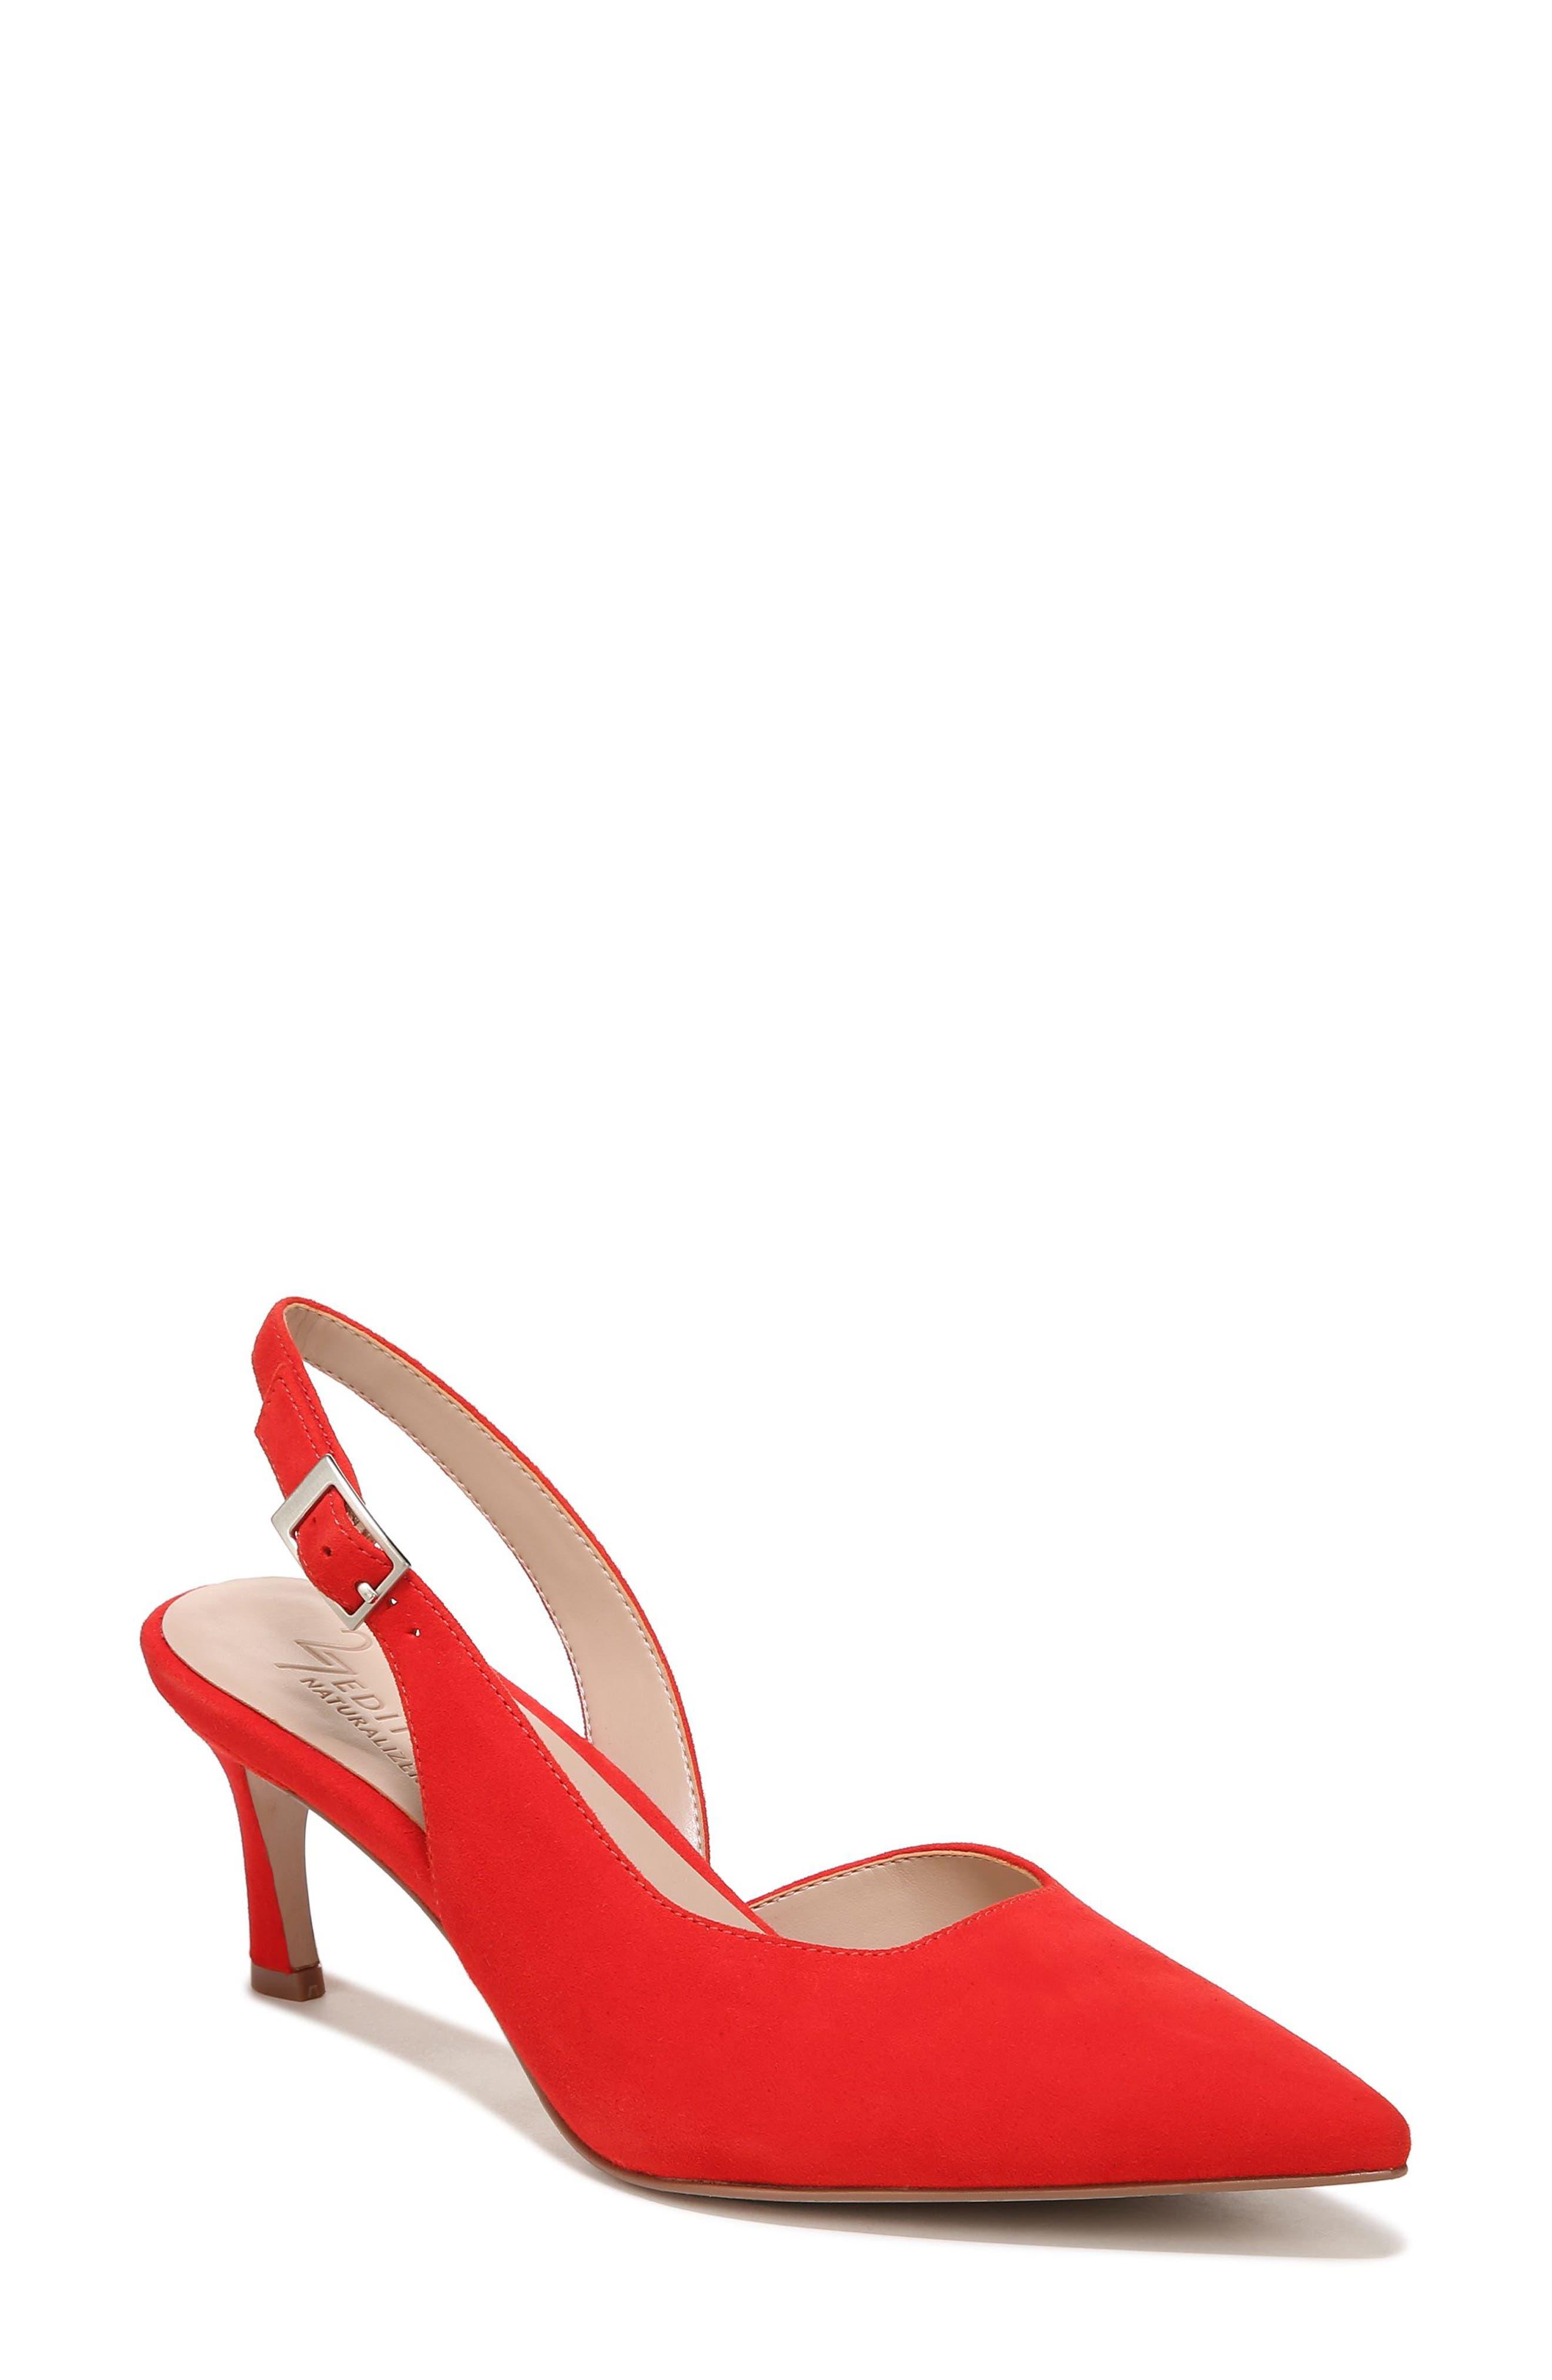 27 EDIT Naturalizer Felicia Slingback Pointed Toe Pump in Red | Lyst